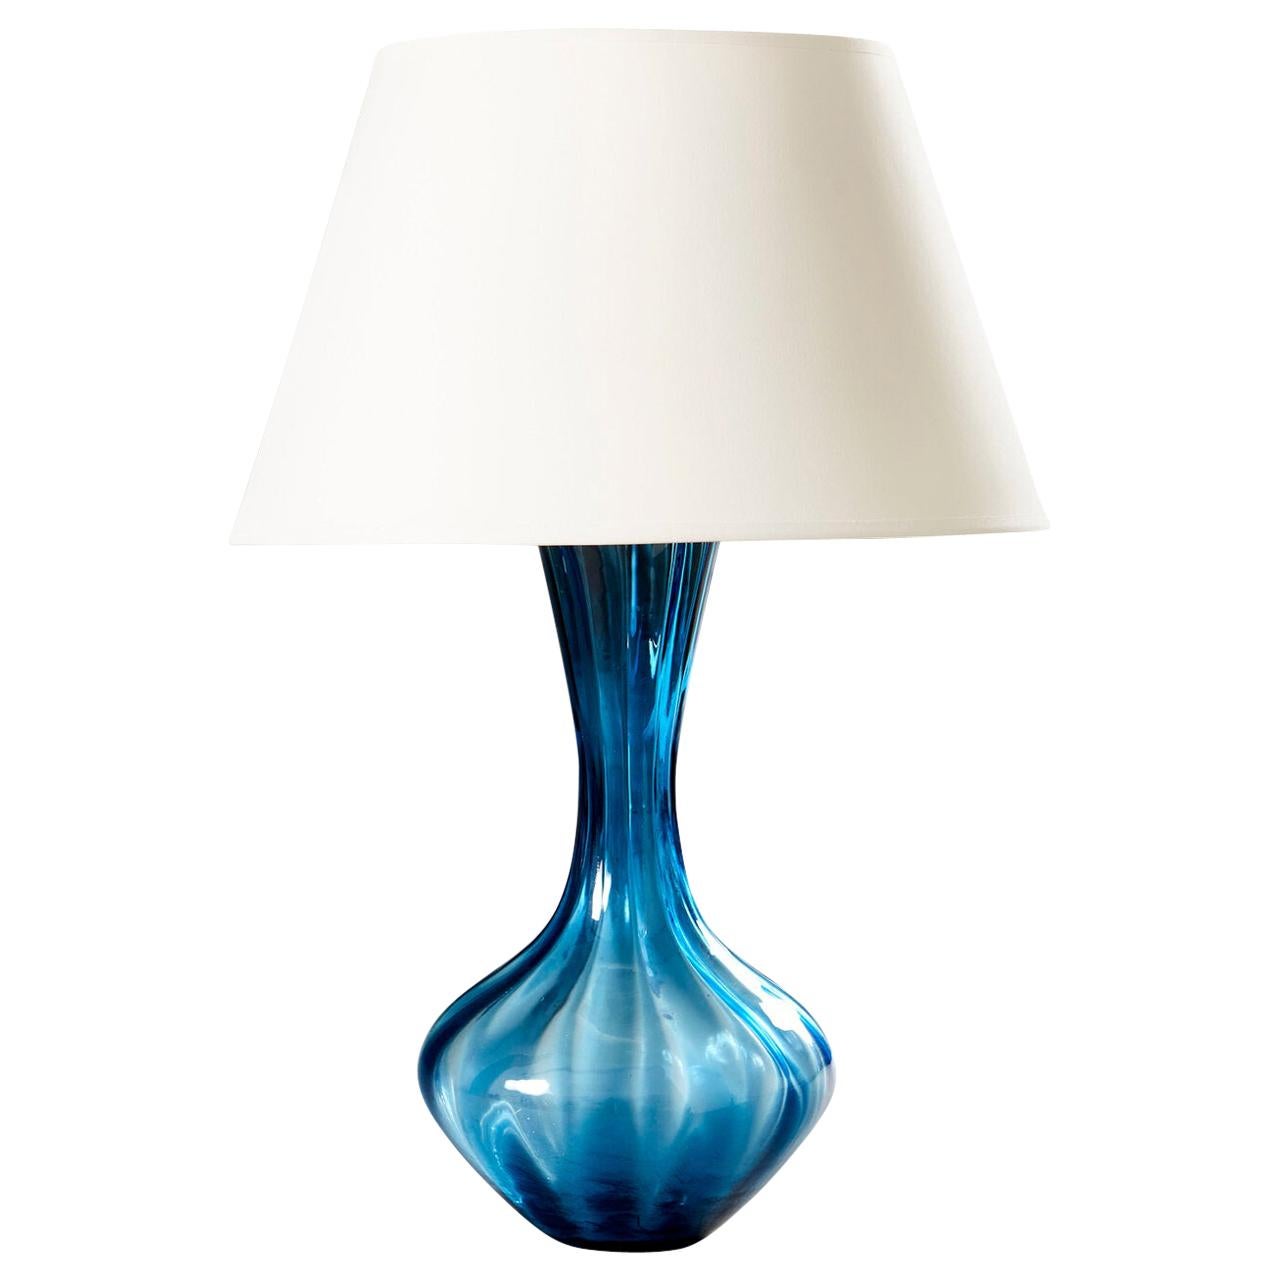 Twisted Blue Glass Vase as a Table Lamp